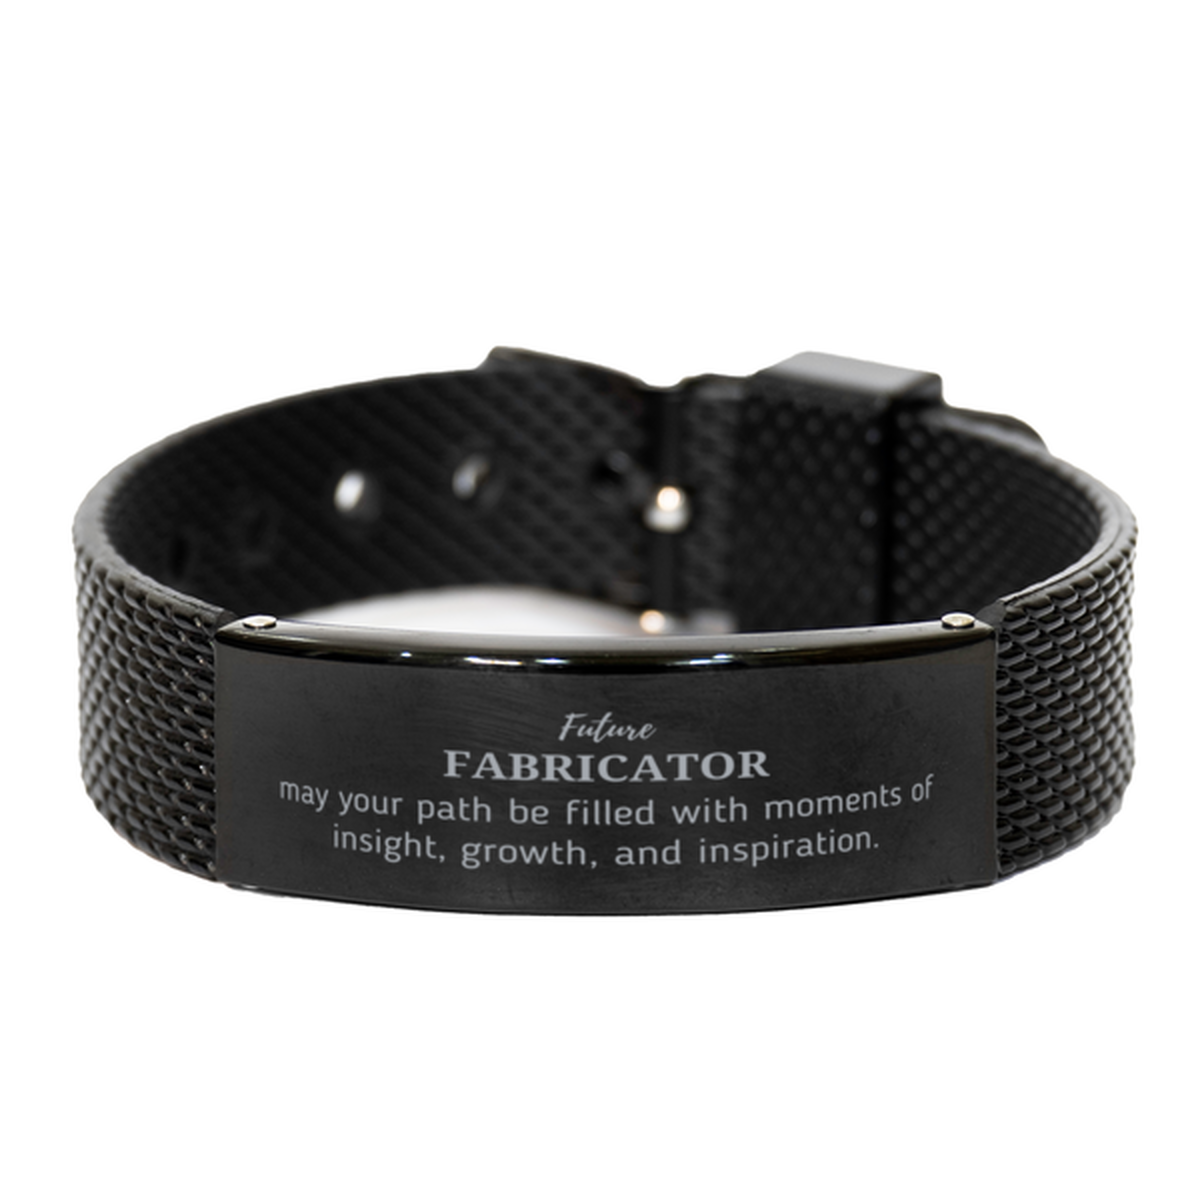 Future Fabricator Gifts, May your path be filled with moments of insight, Graduation Gifts for New Fabricator, Christmas Unique Black Shark Mesh Bracelet For Men, Women, Friends